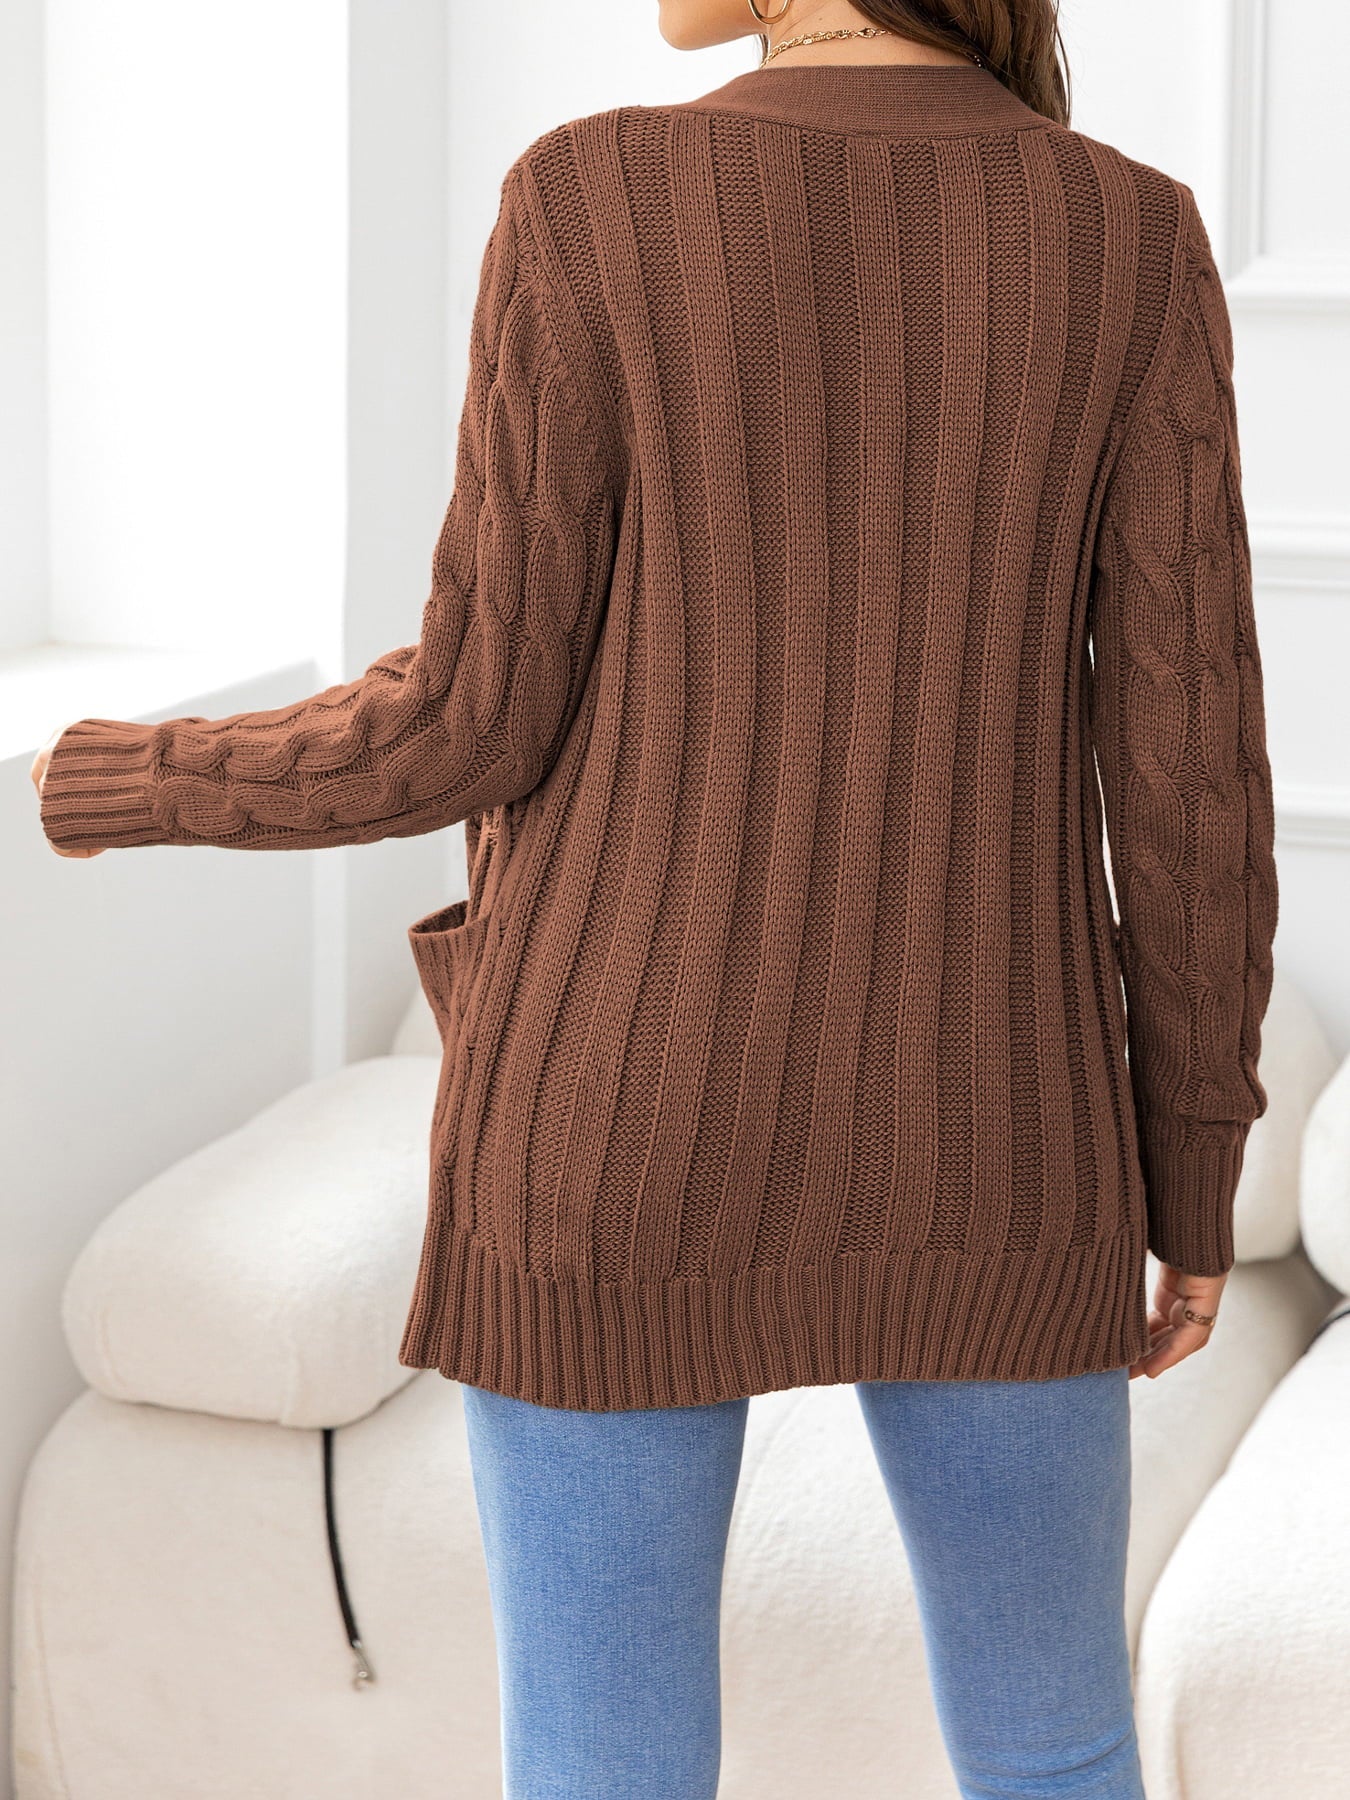 Button Down Cable-Knit Cardigan - Women’s Clothing & Accessories - Shirts & Tops - 36 - 2024